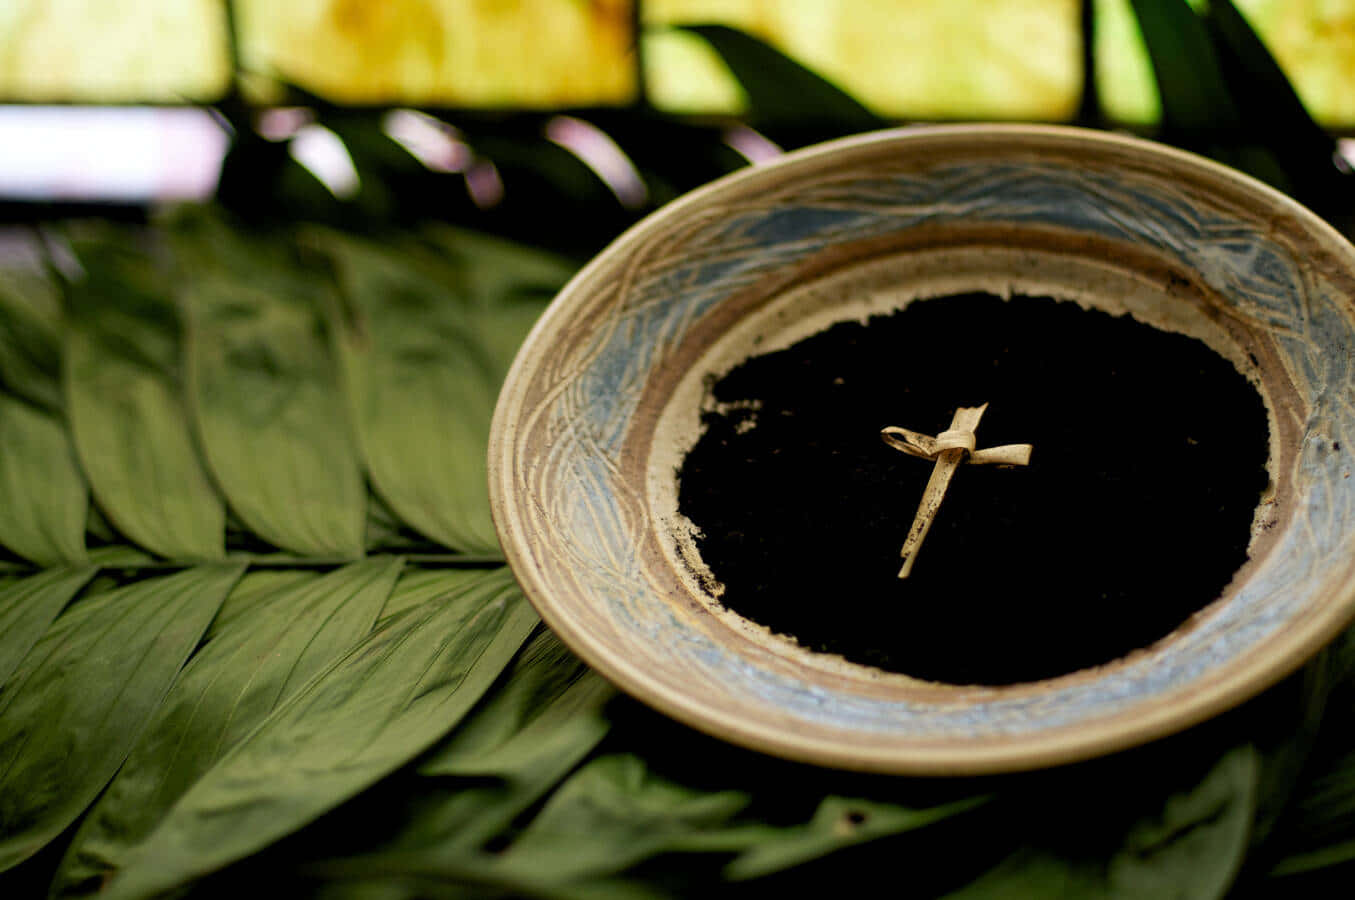 Celebrate Lent by Praying, Fasting, and Doing Good Deeds